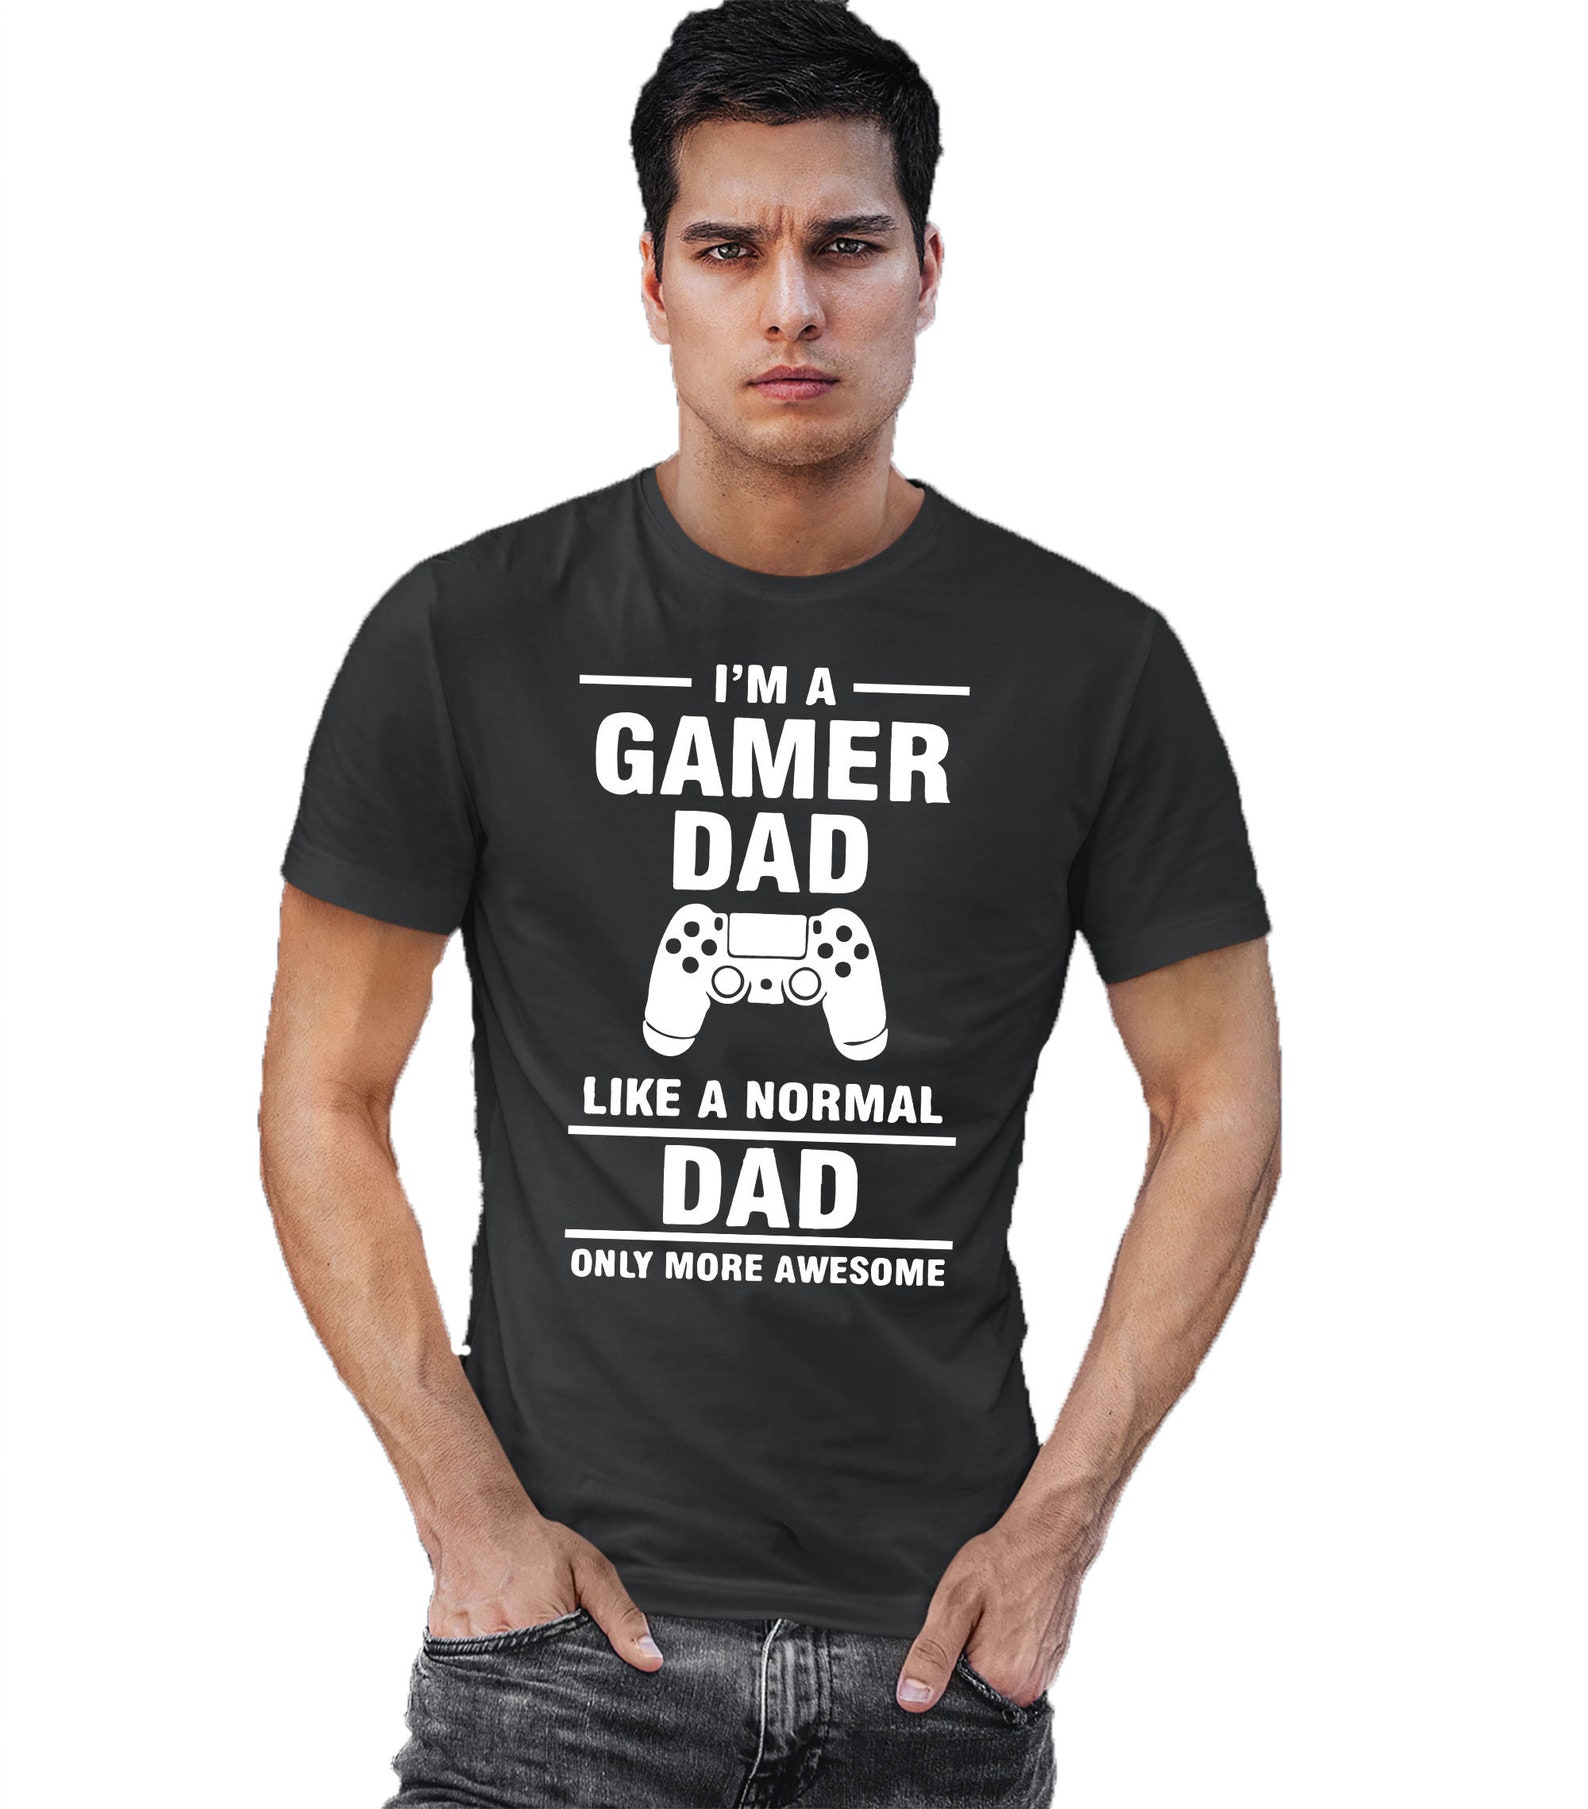 Gamer Dad Controller Xbox Playstation Black Tee White Print Father Gift ...